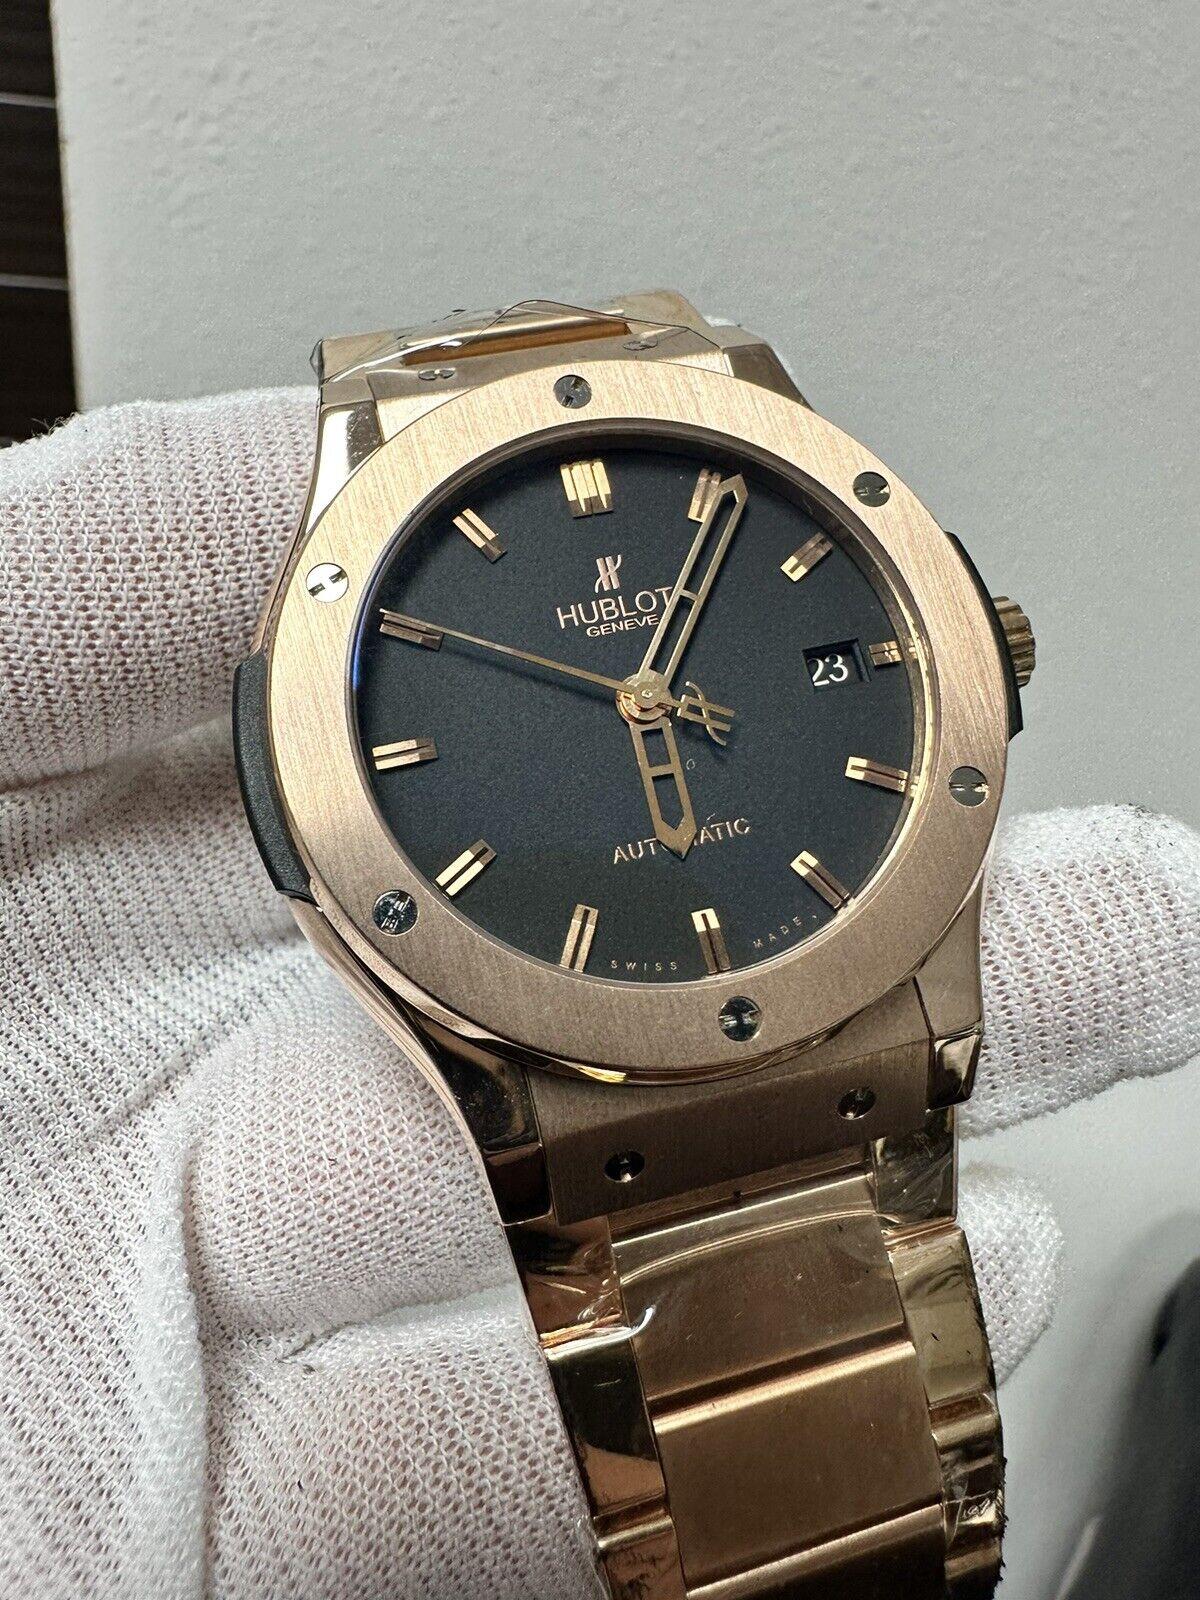 Style Number: 511.OX.1180.OX
 
Year: 2019
 
Model: Classic Fusion
 
Case Material: 18K Rose Gold
 
Band: 18K Rose Gold
 
Bezel:  18K Rose Gold
 
Dial: Black
 
Face: Sapphire Crystal 
 
Case Size: 45mm 
 
Includes: 
-Hublot Box & Paper
-Certified